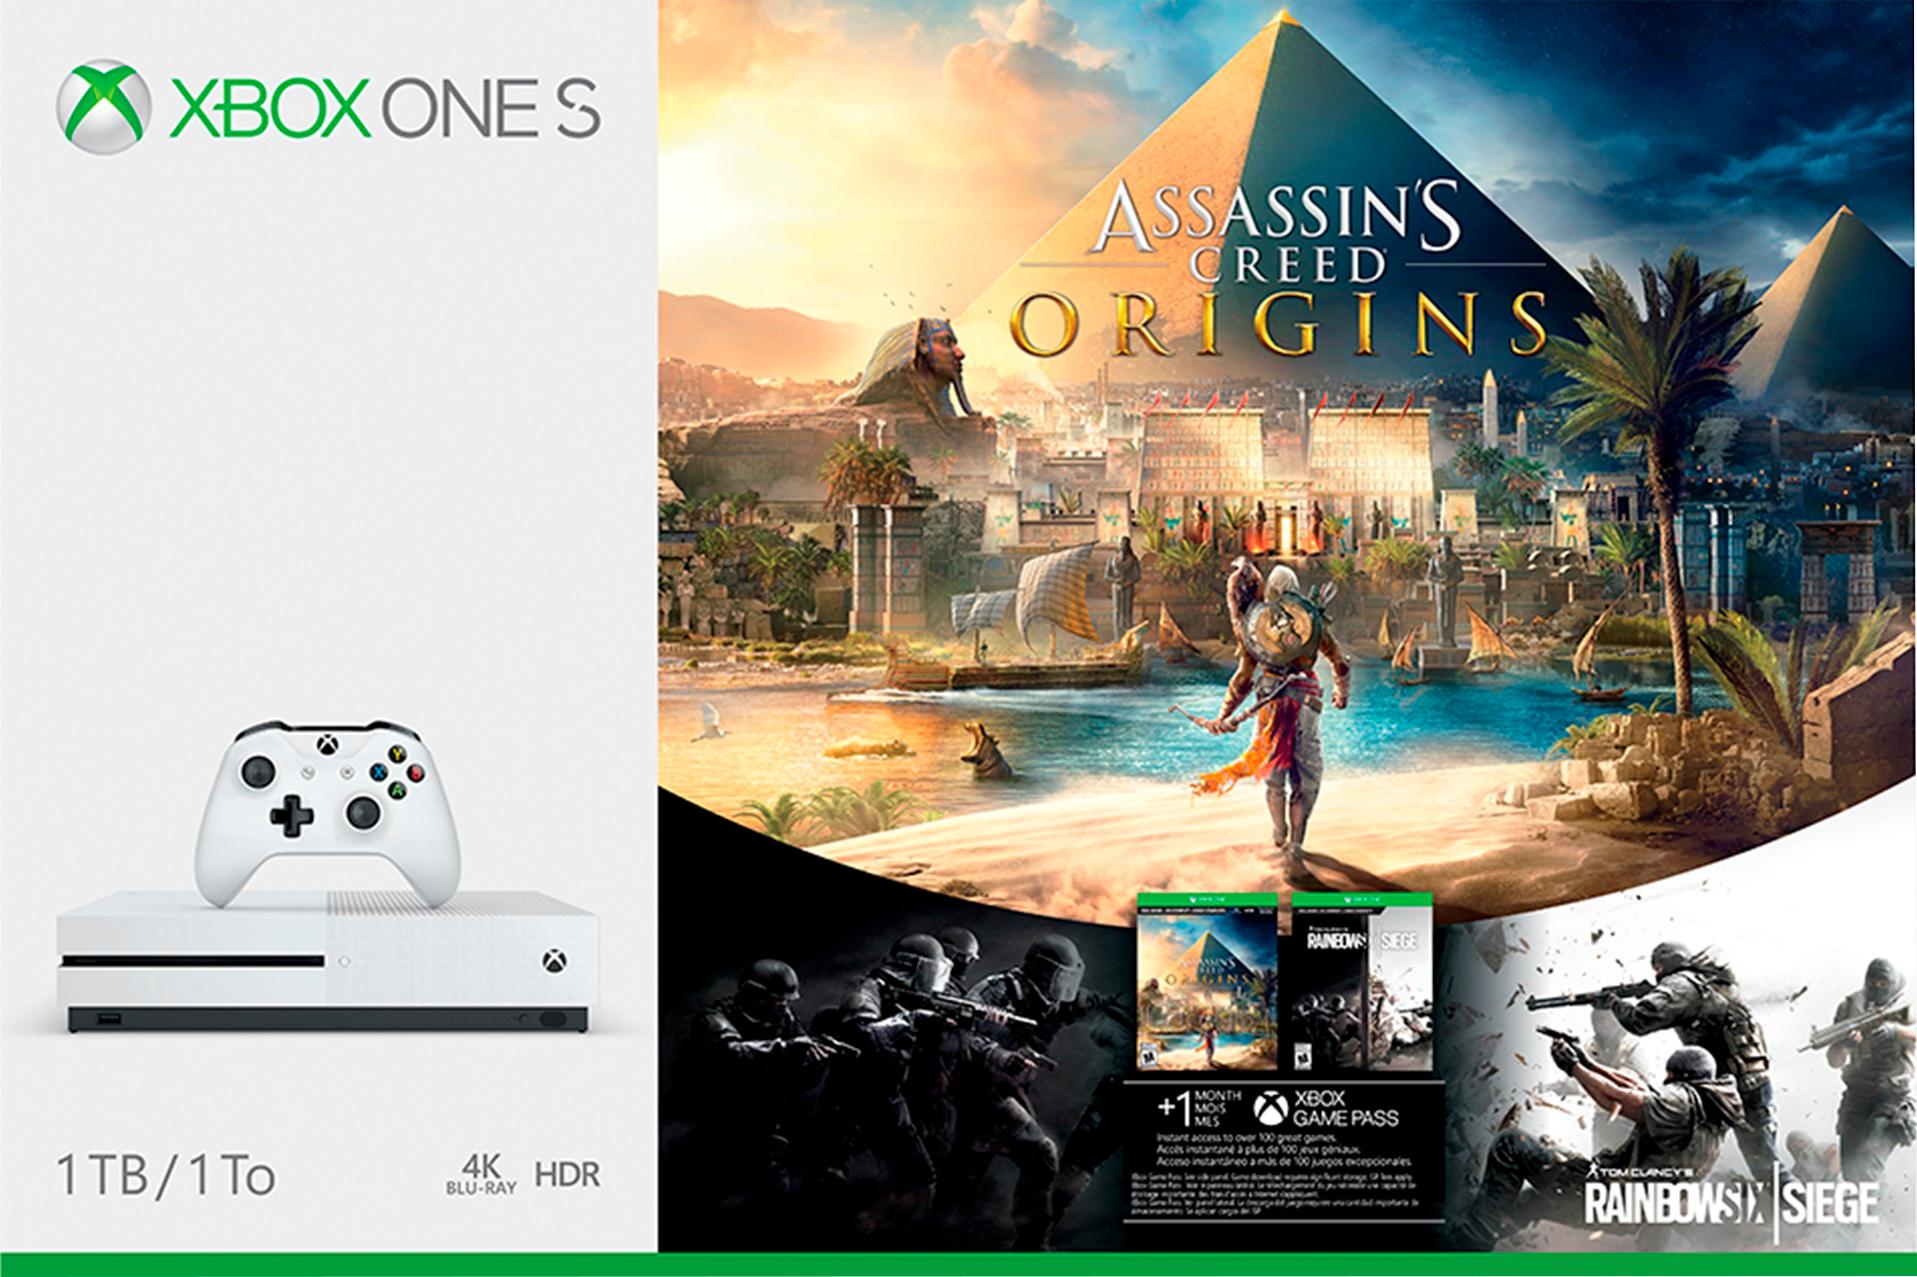 Assassin's Creed 2 Free On Xbox 360 Starting Tomorrow